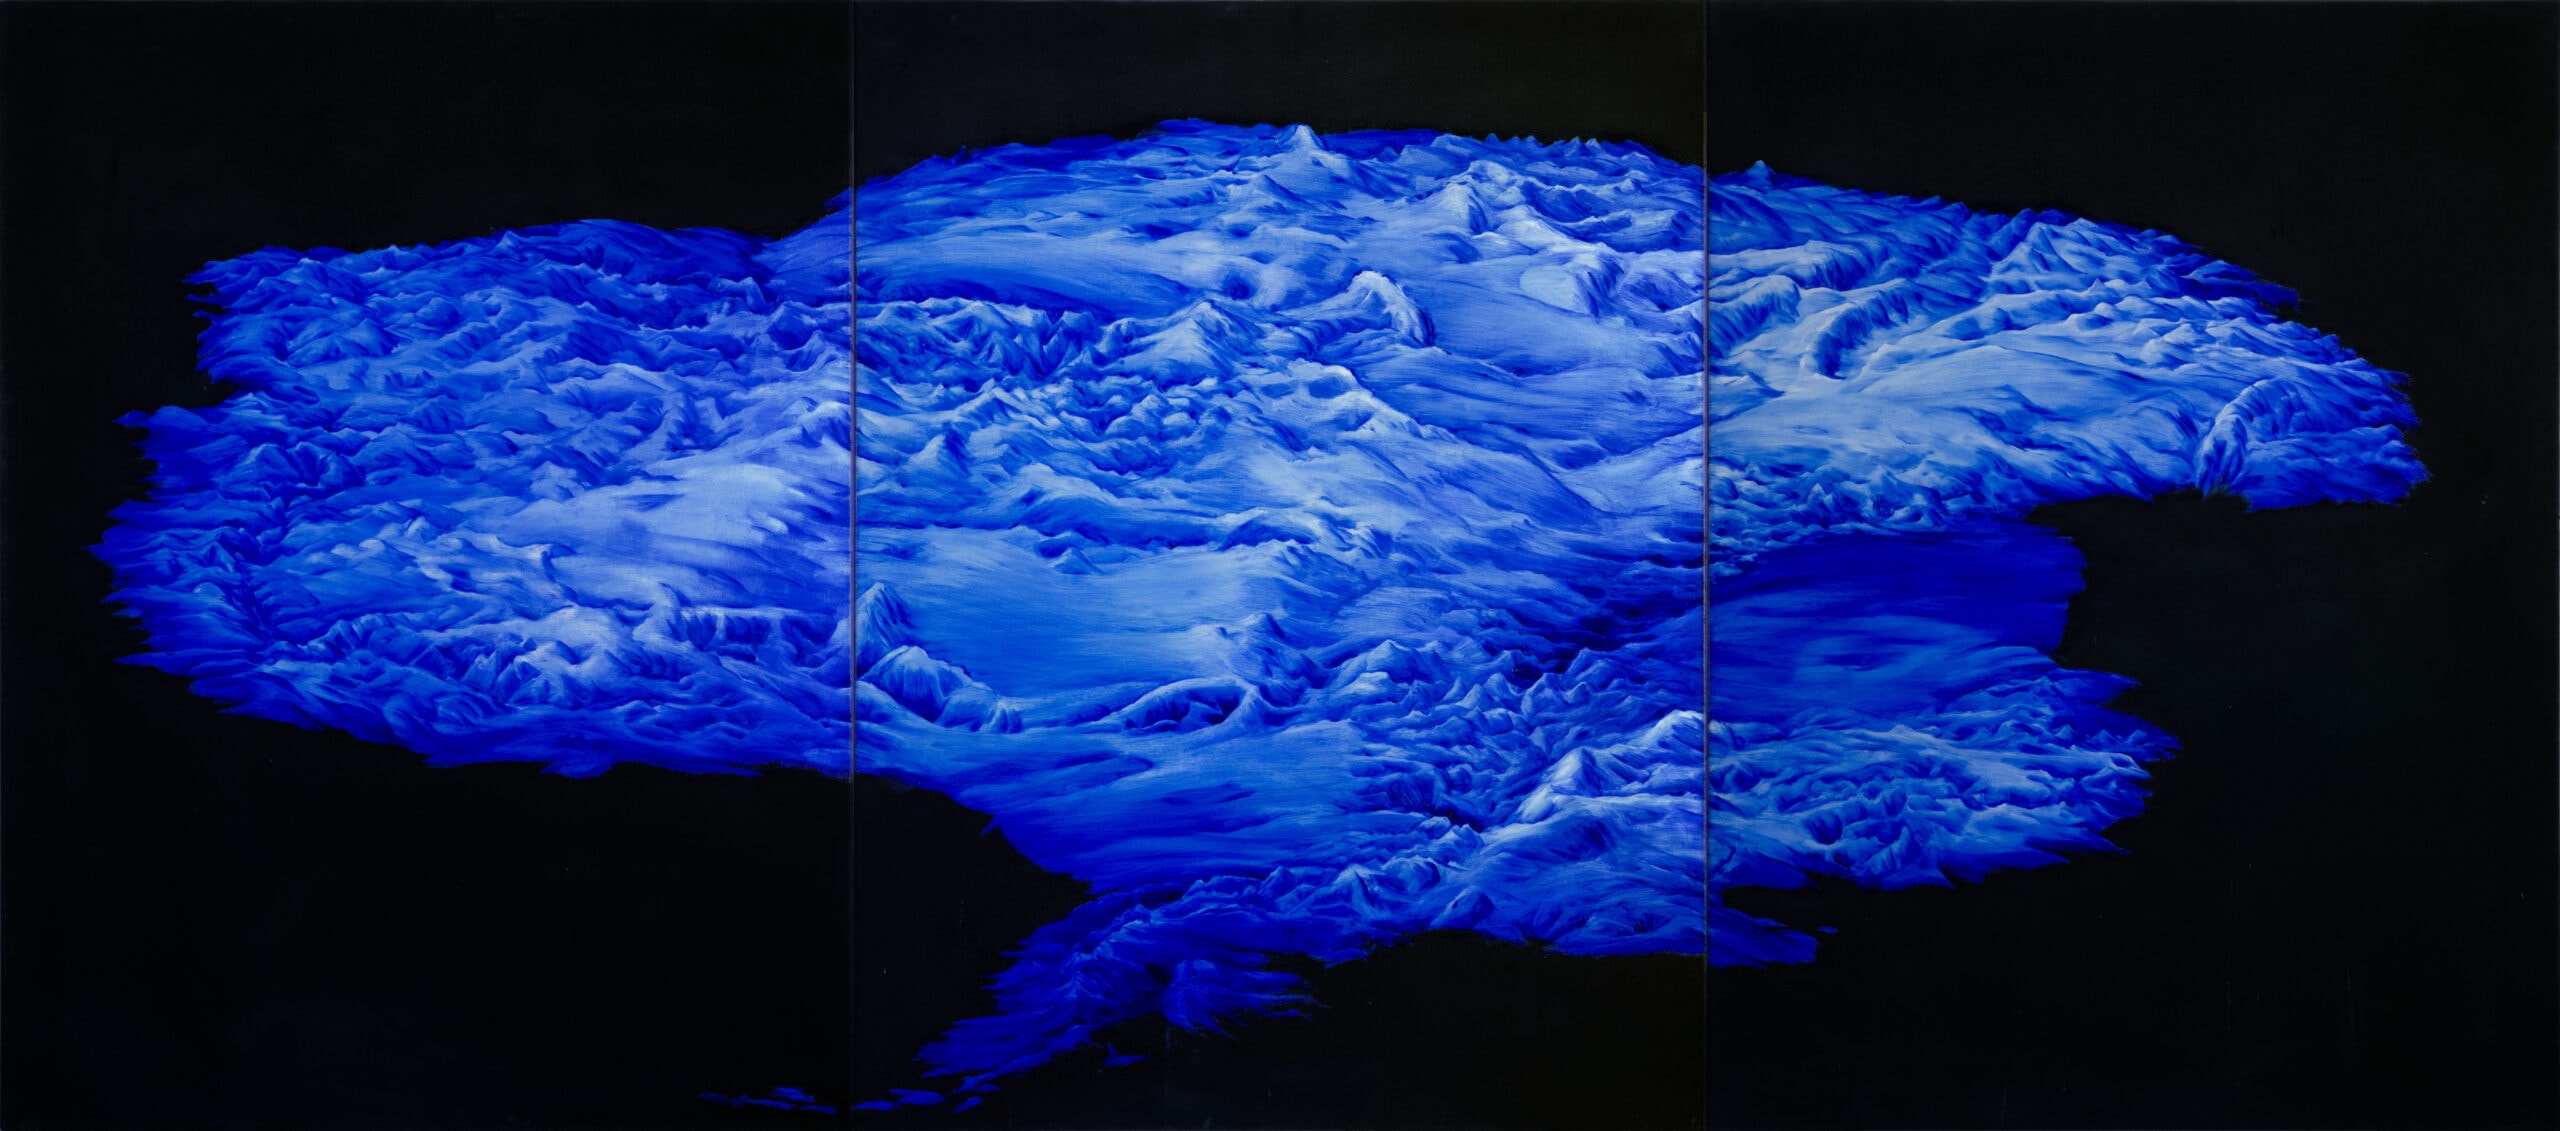 'Datum gelidae [Given the cold]', 2023, oil on linen, three panels, 276 x 122 cm overall